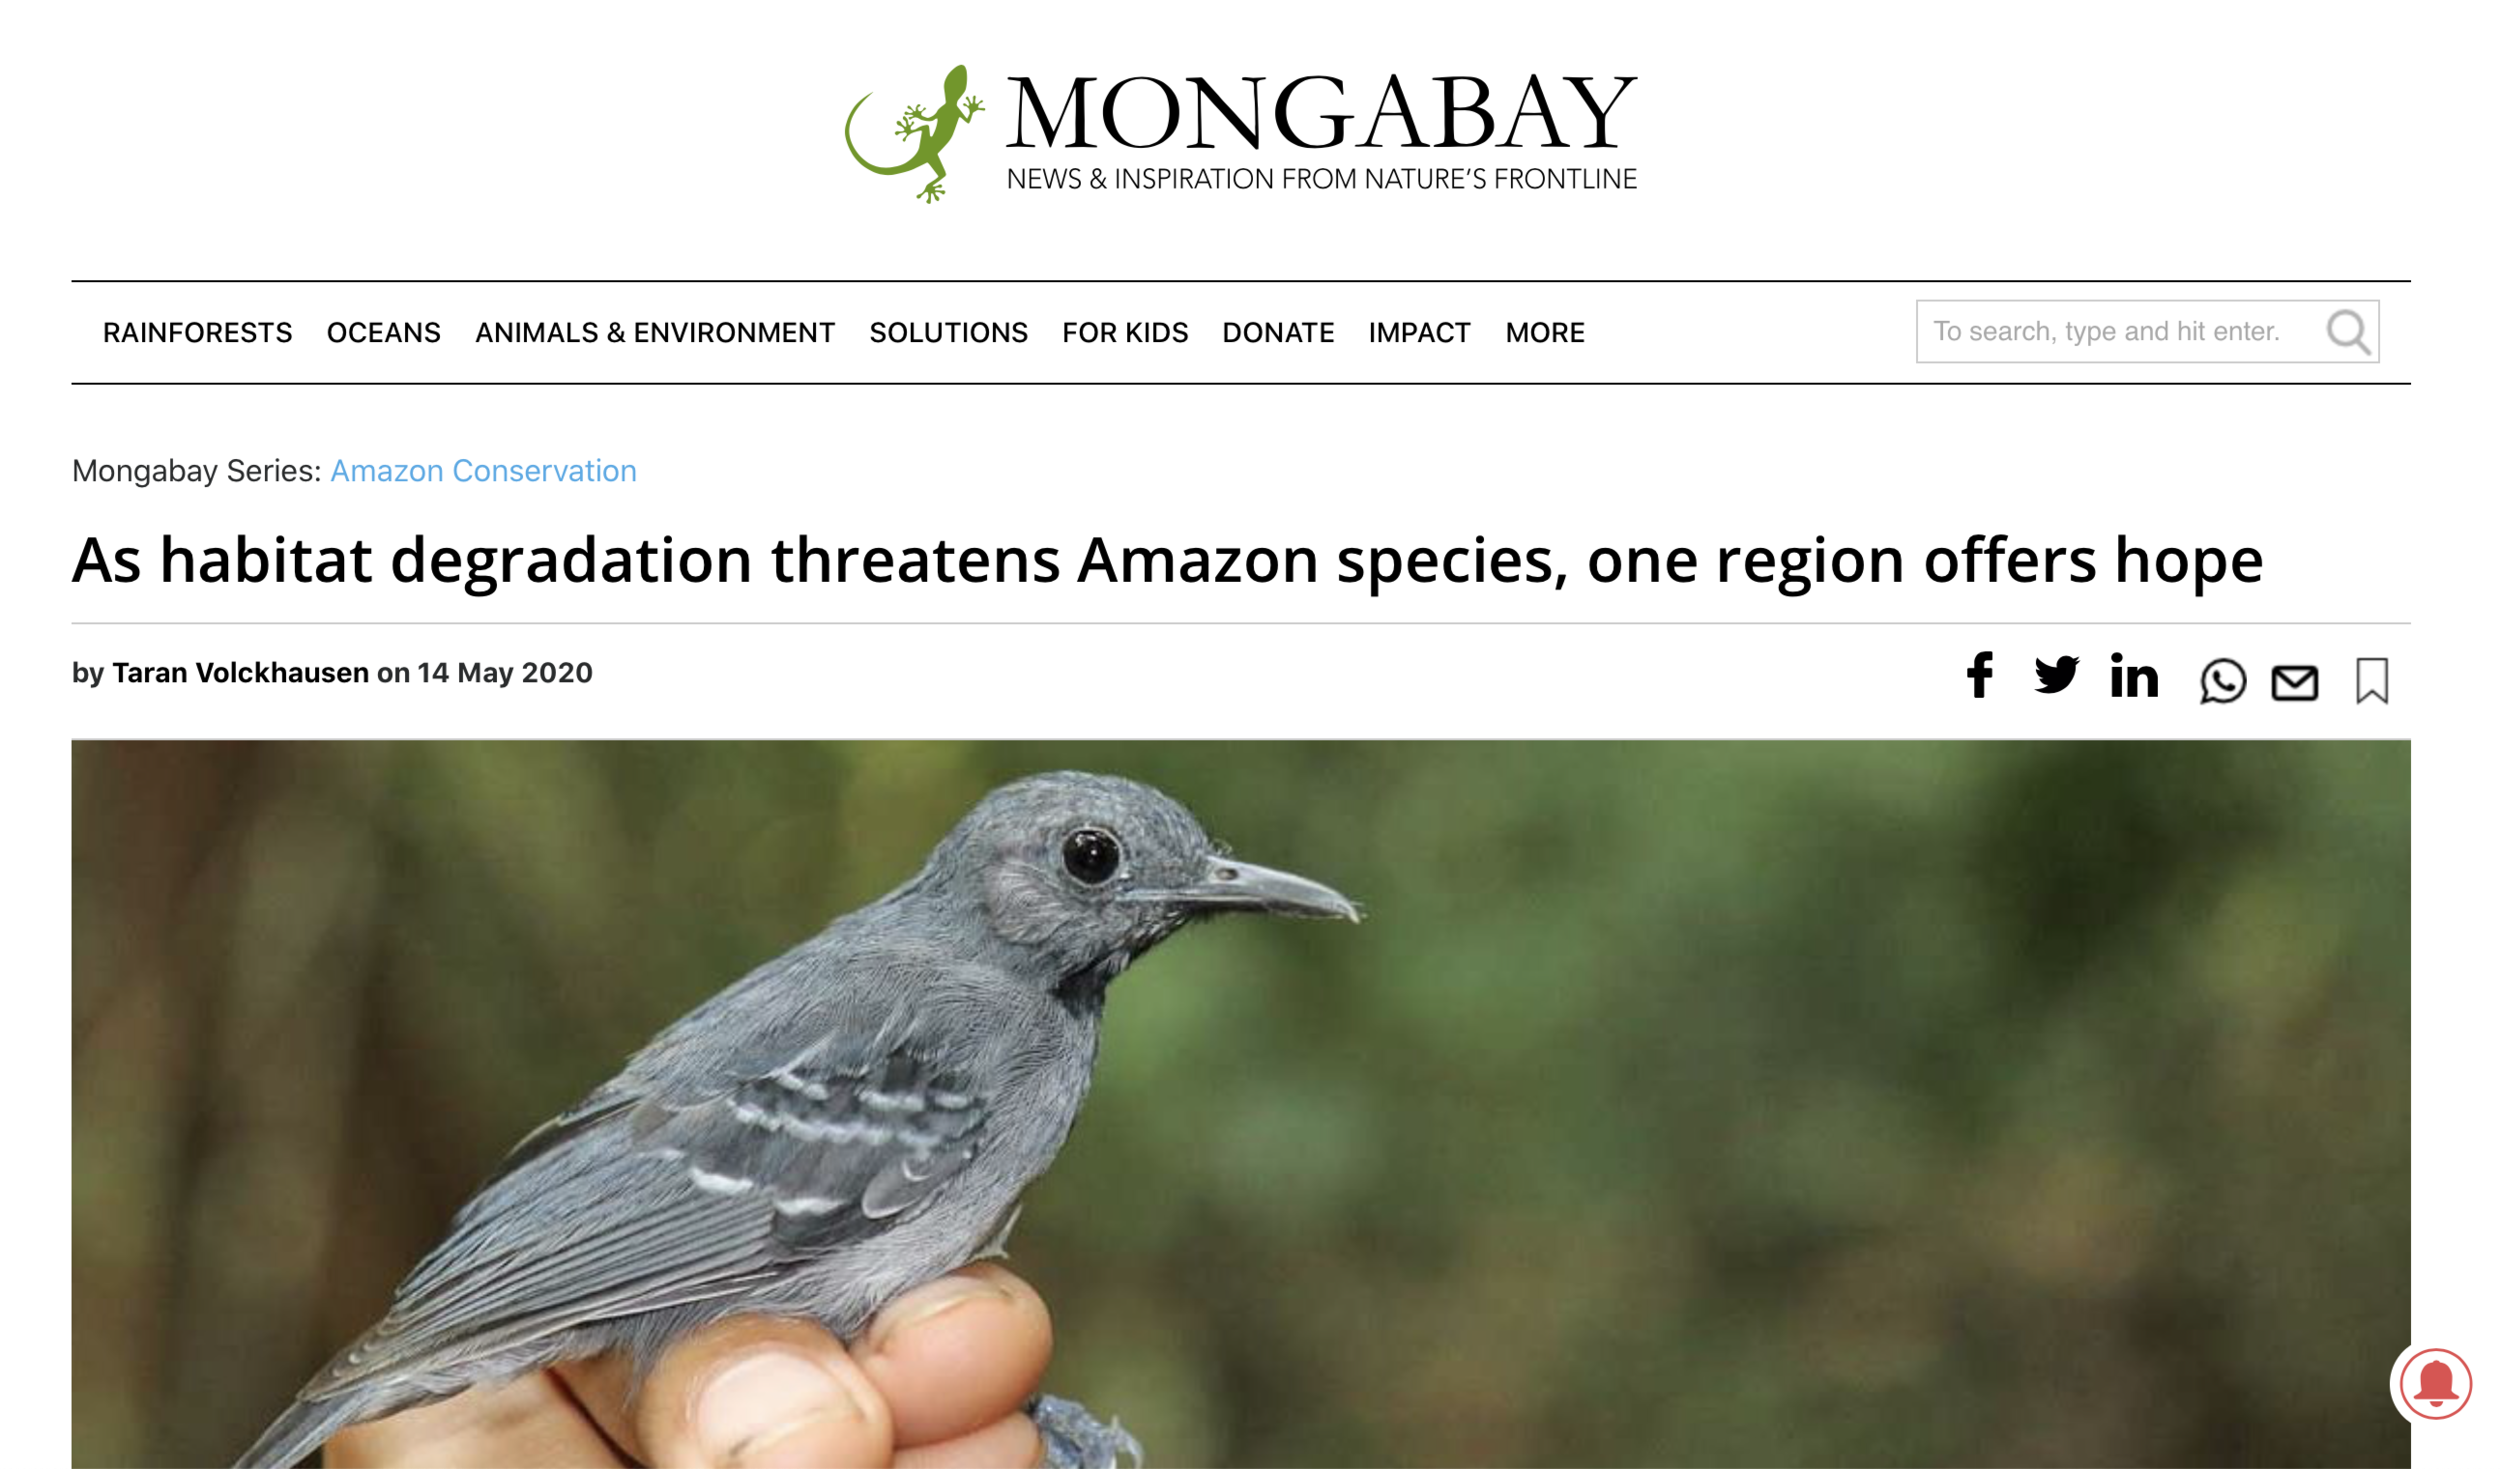  Mongabay features Lesley’s recent  publication  on the Rupununi portal in Guyana.  